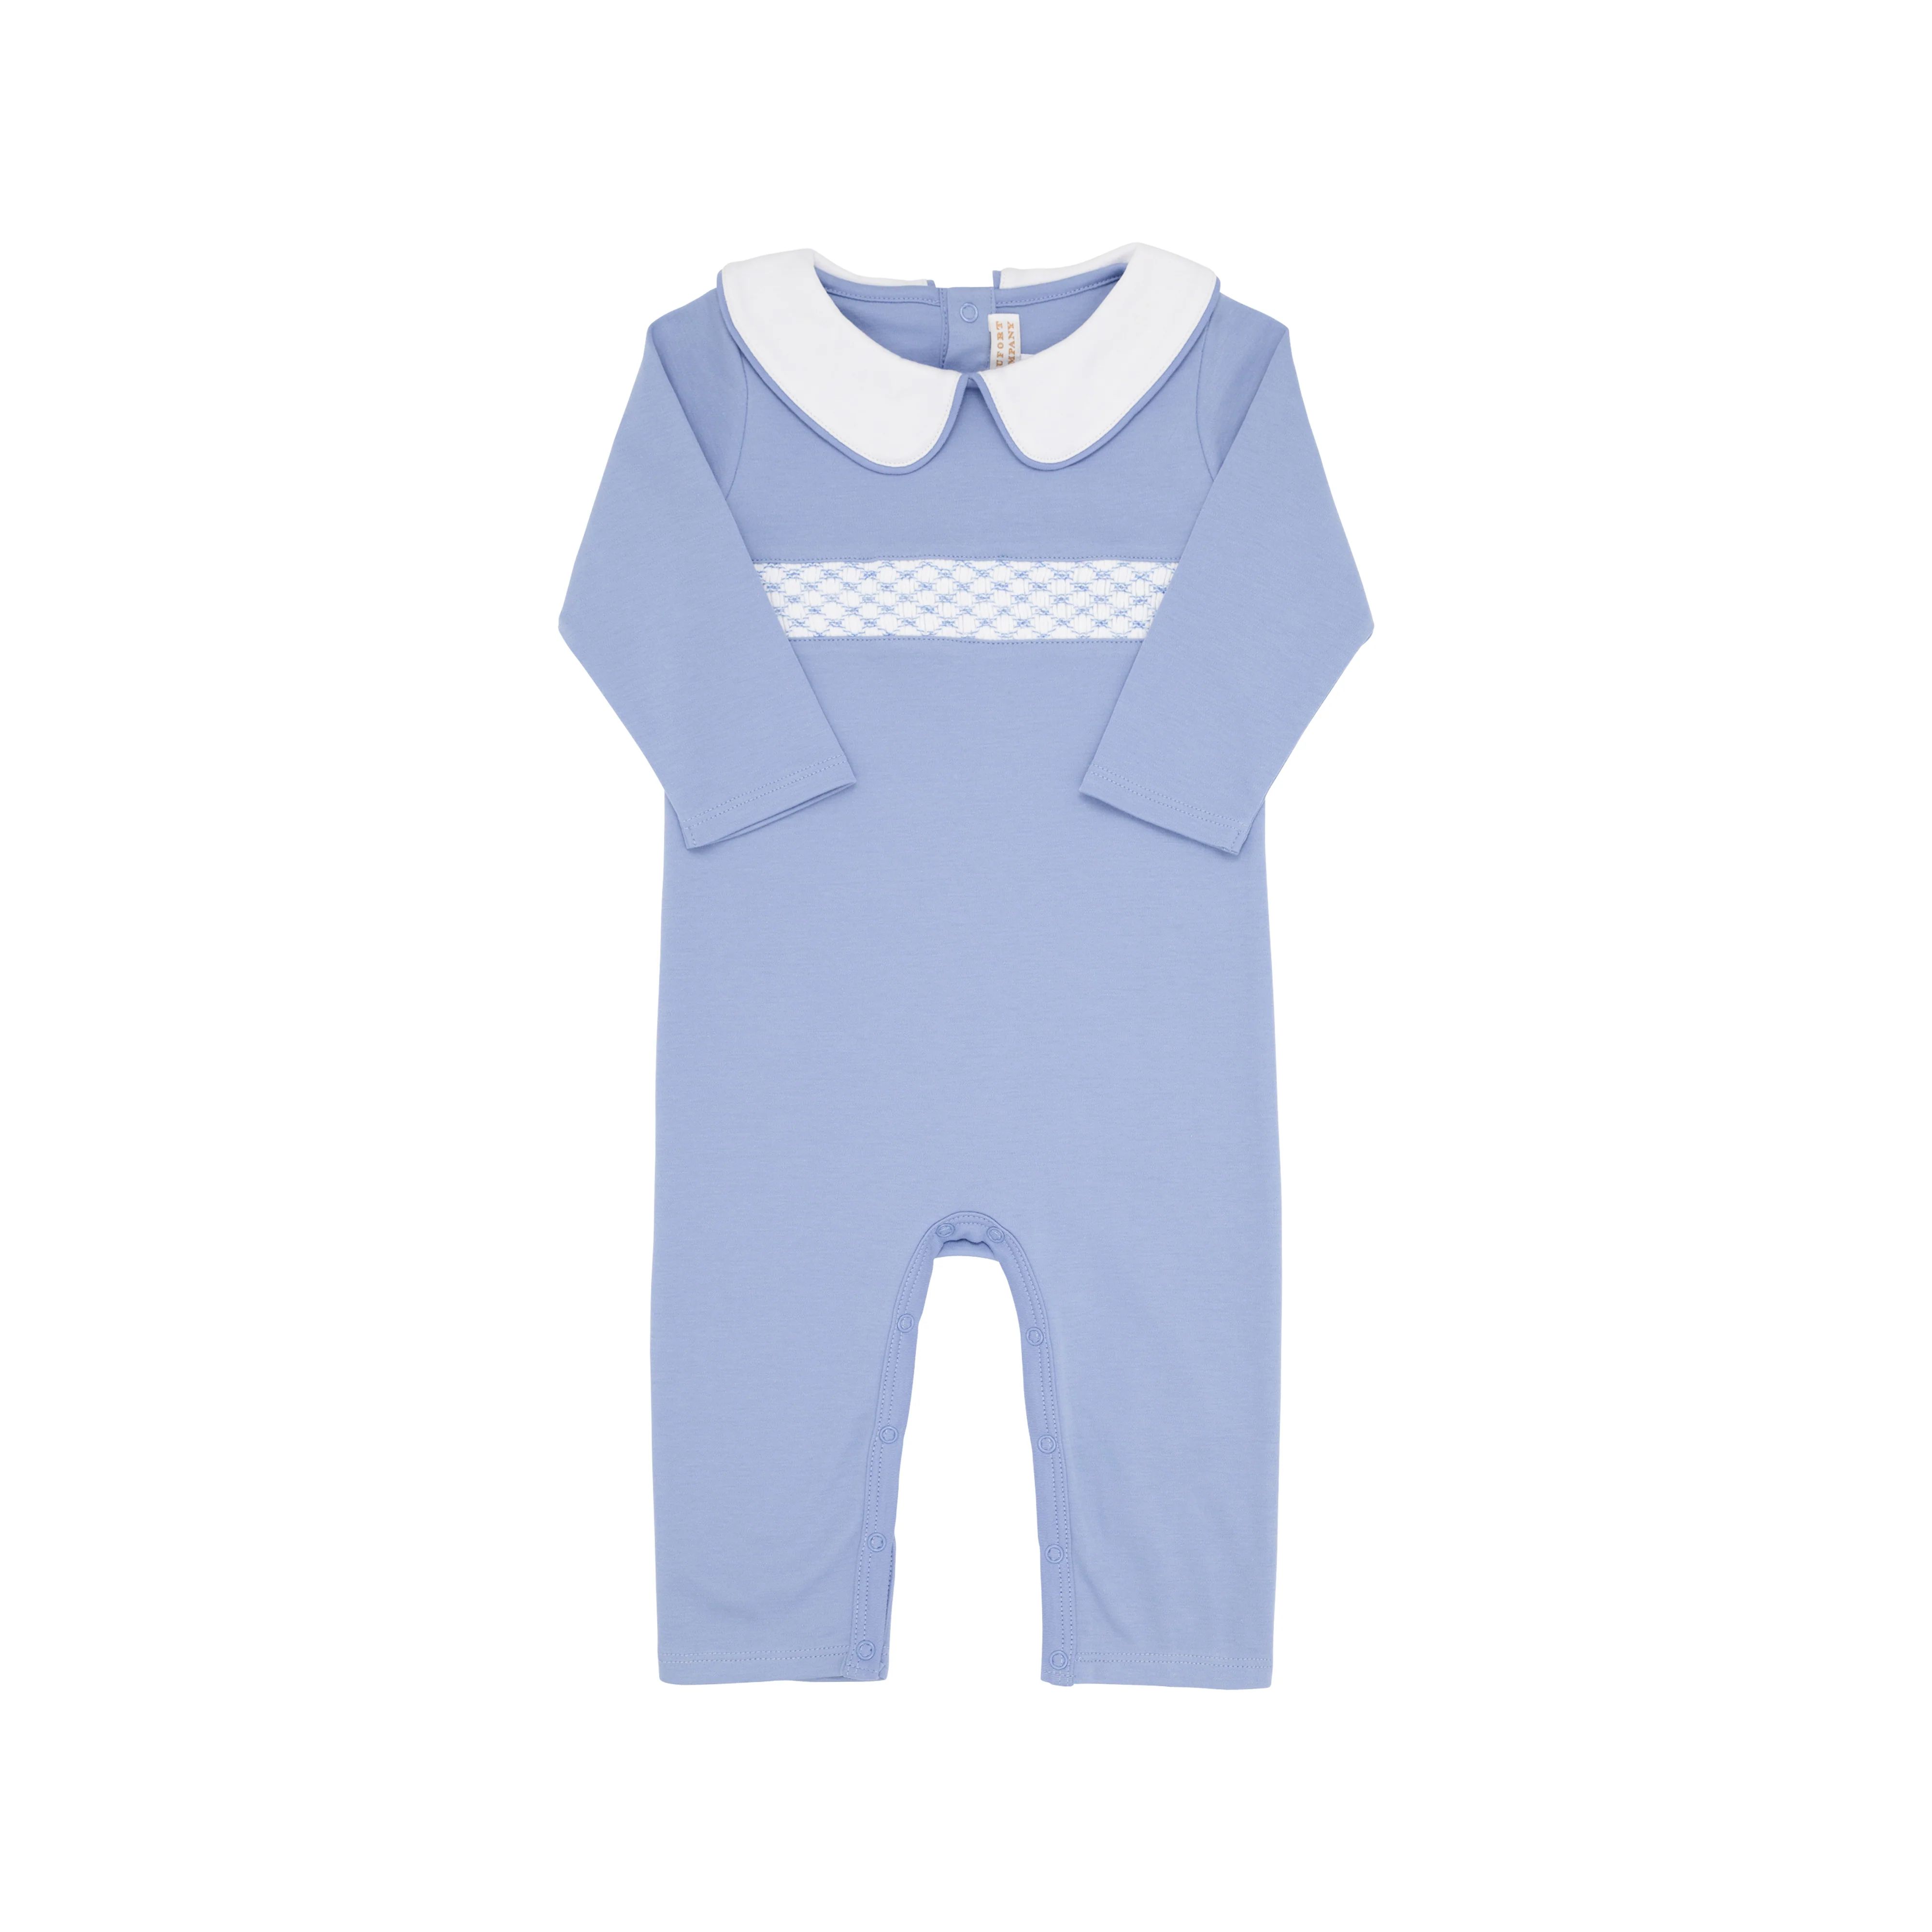 Samuel Smocked Romper - Park City Periwinkle with Worth Avenue White Collar | The Beaufort Bonnet Company